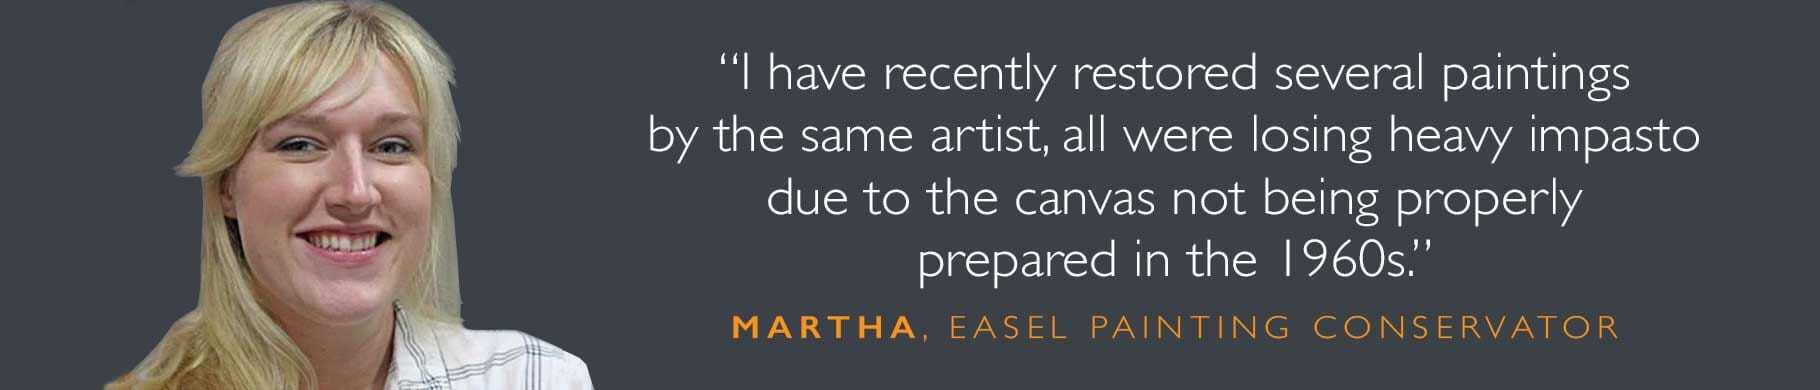 martha quote about modern and contemporary painting restoration